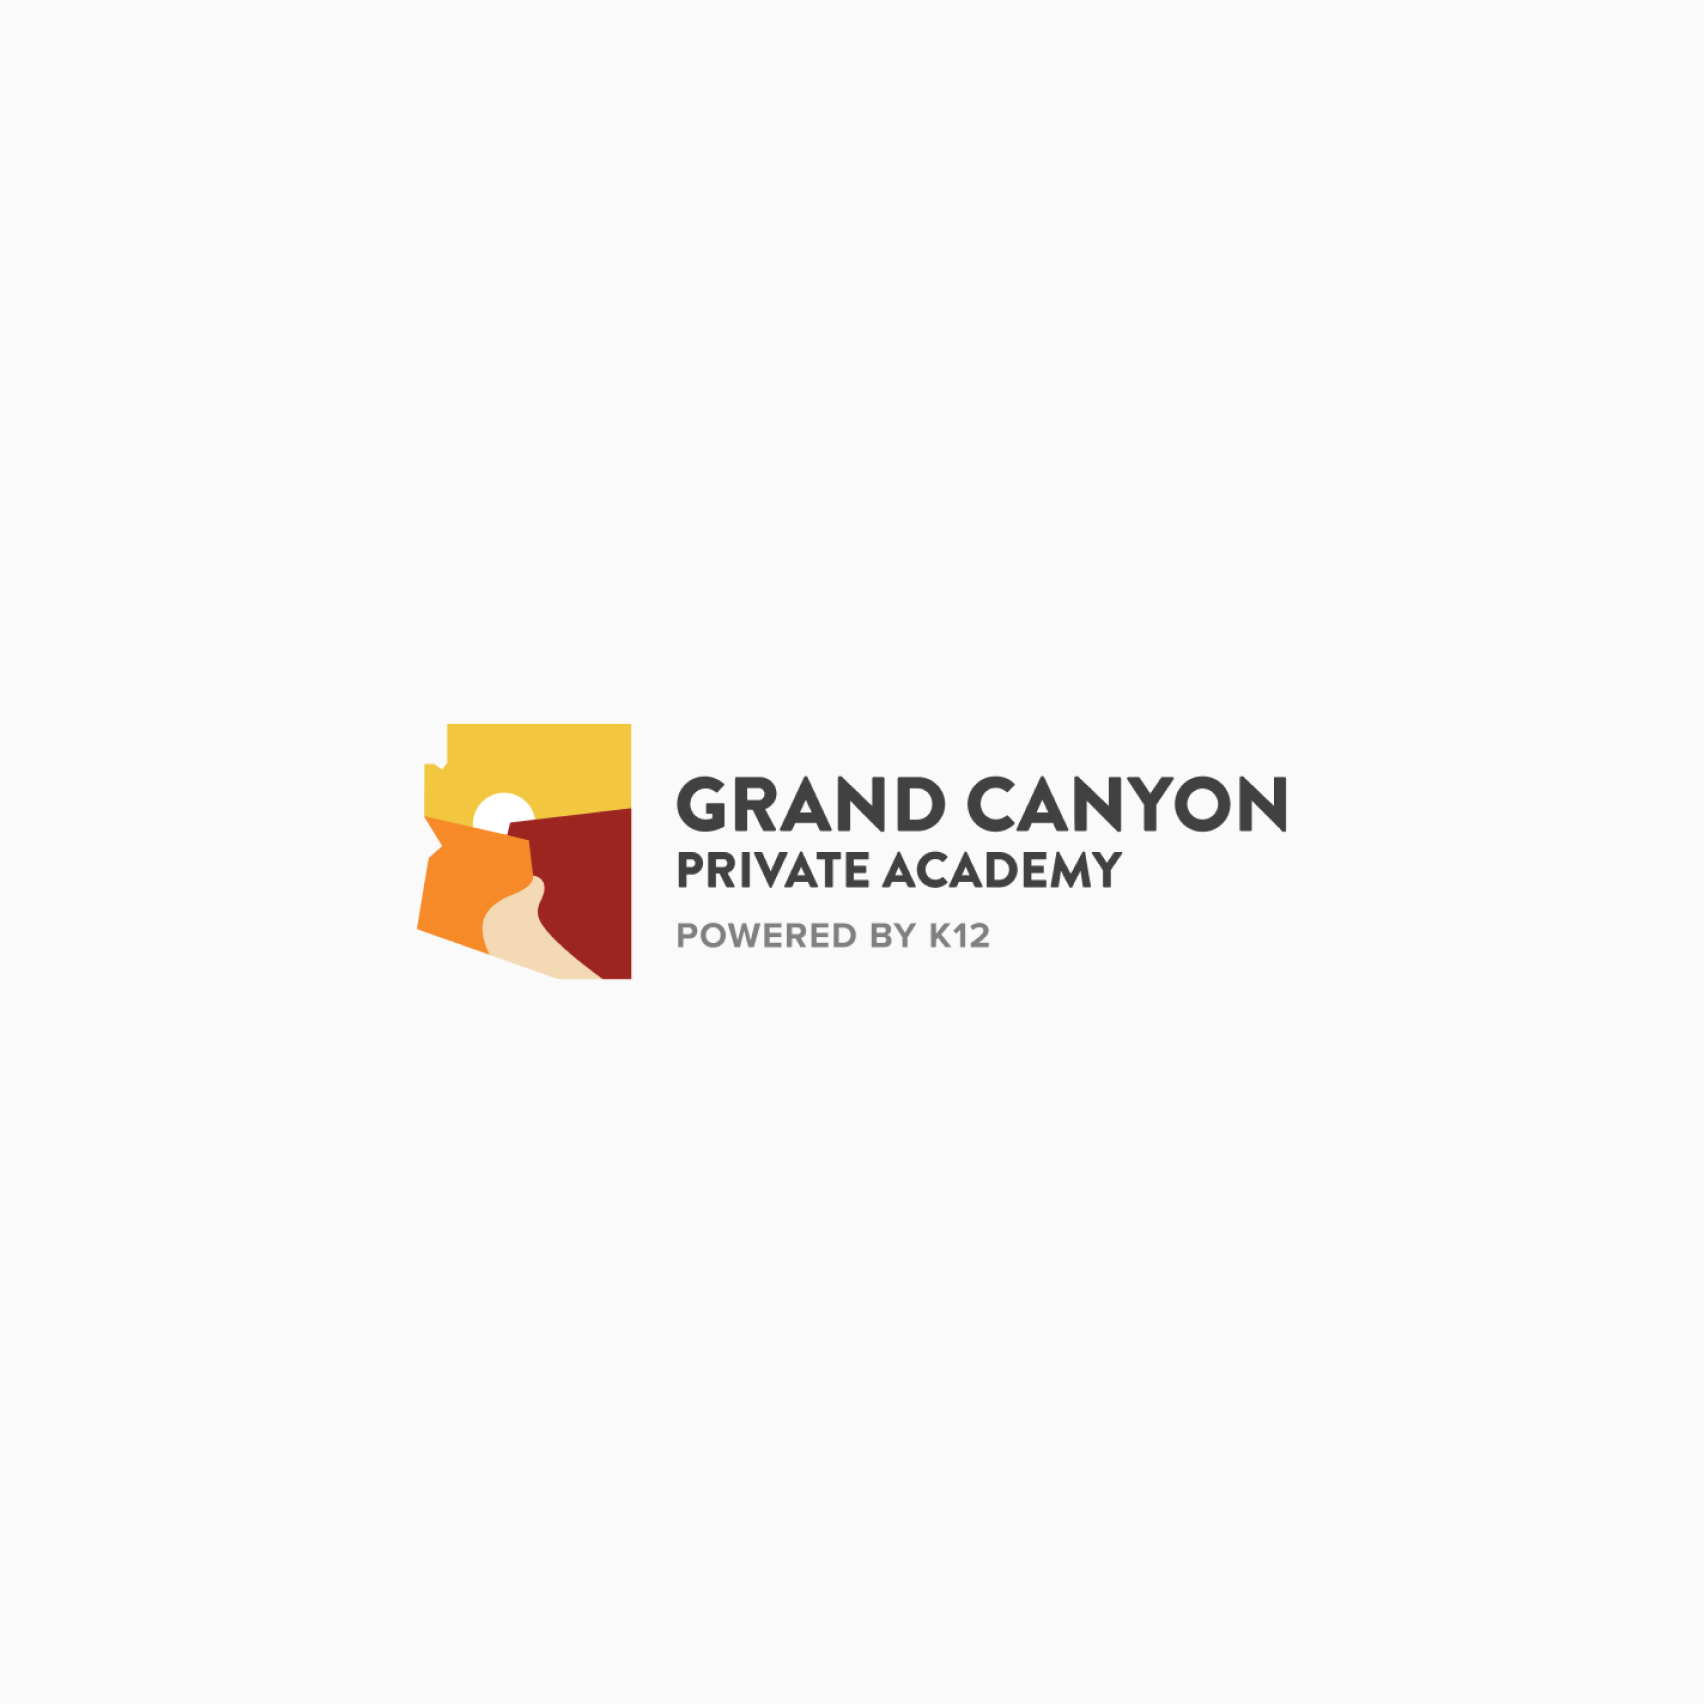 Online Private Schools image 15 (name Grand Canyon)